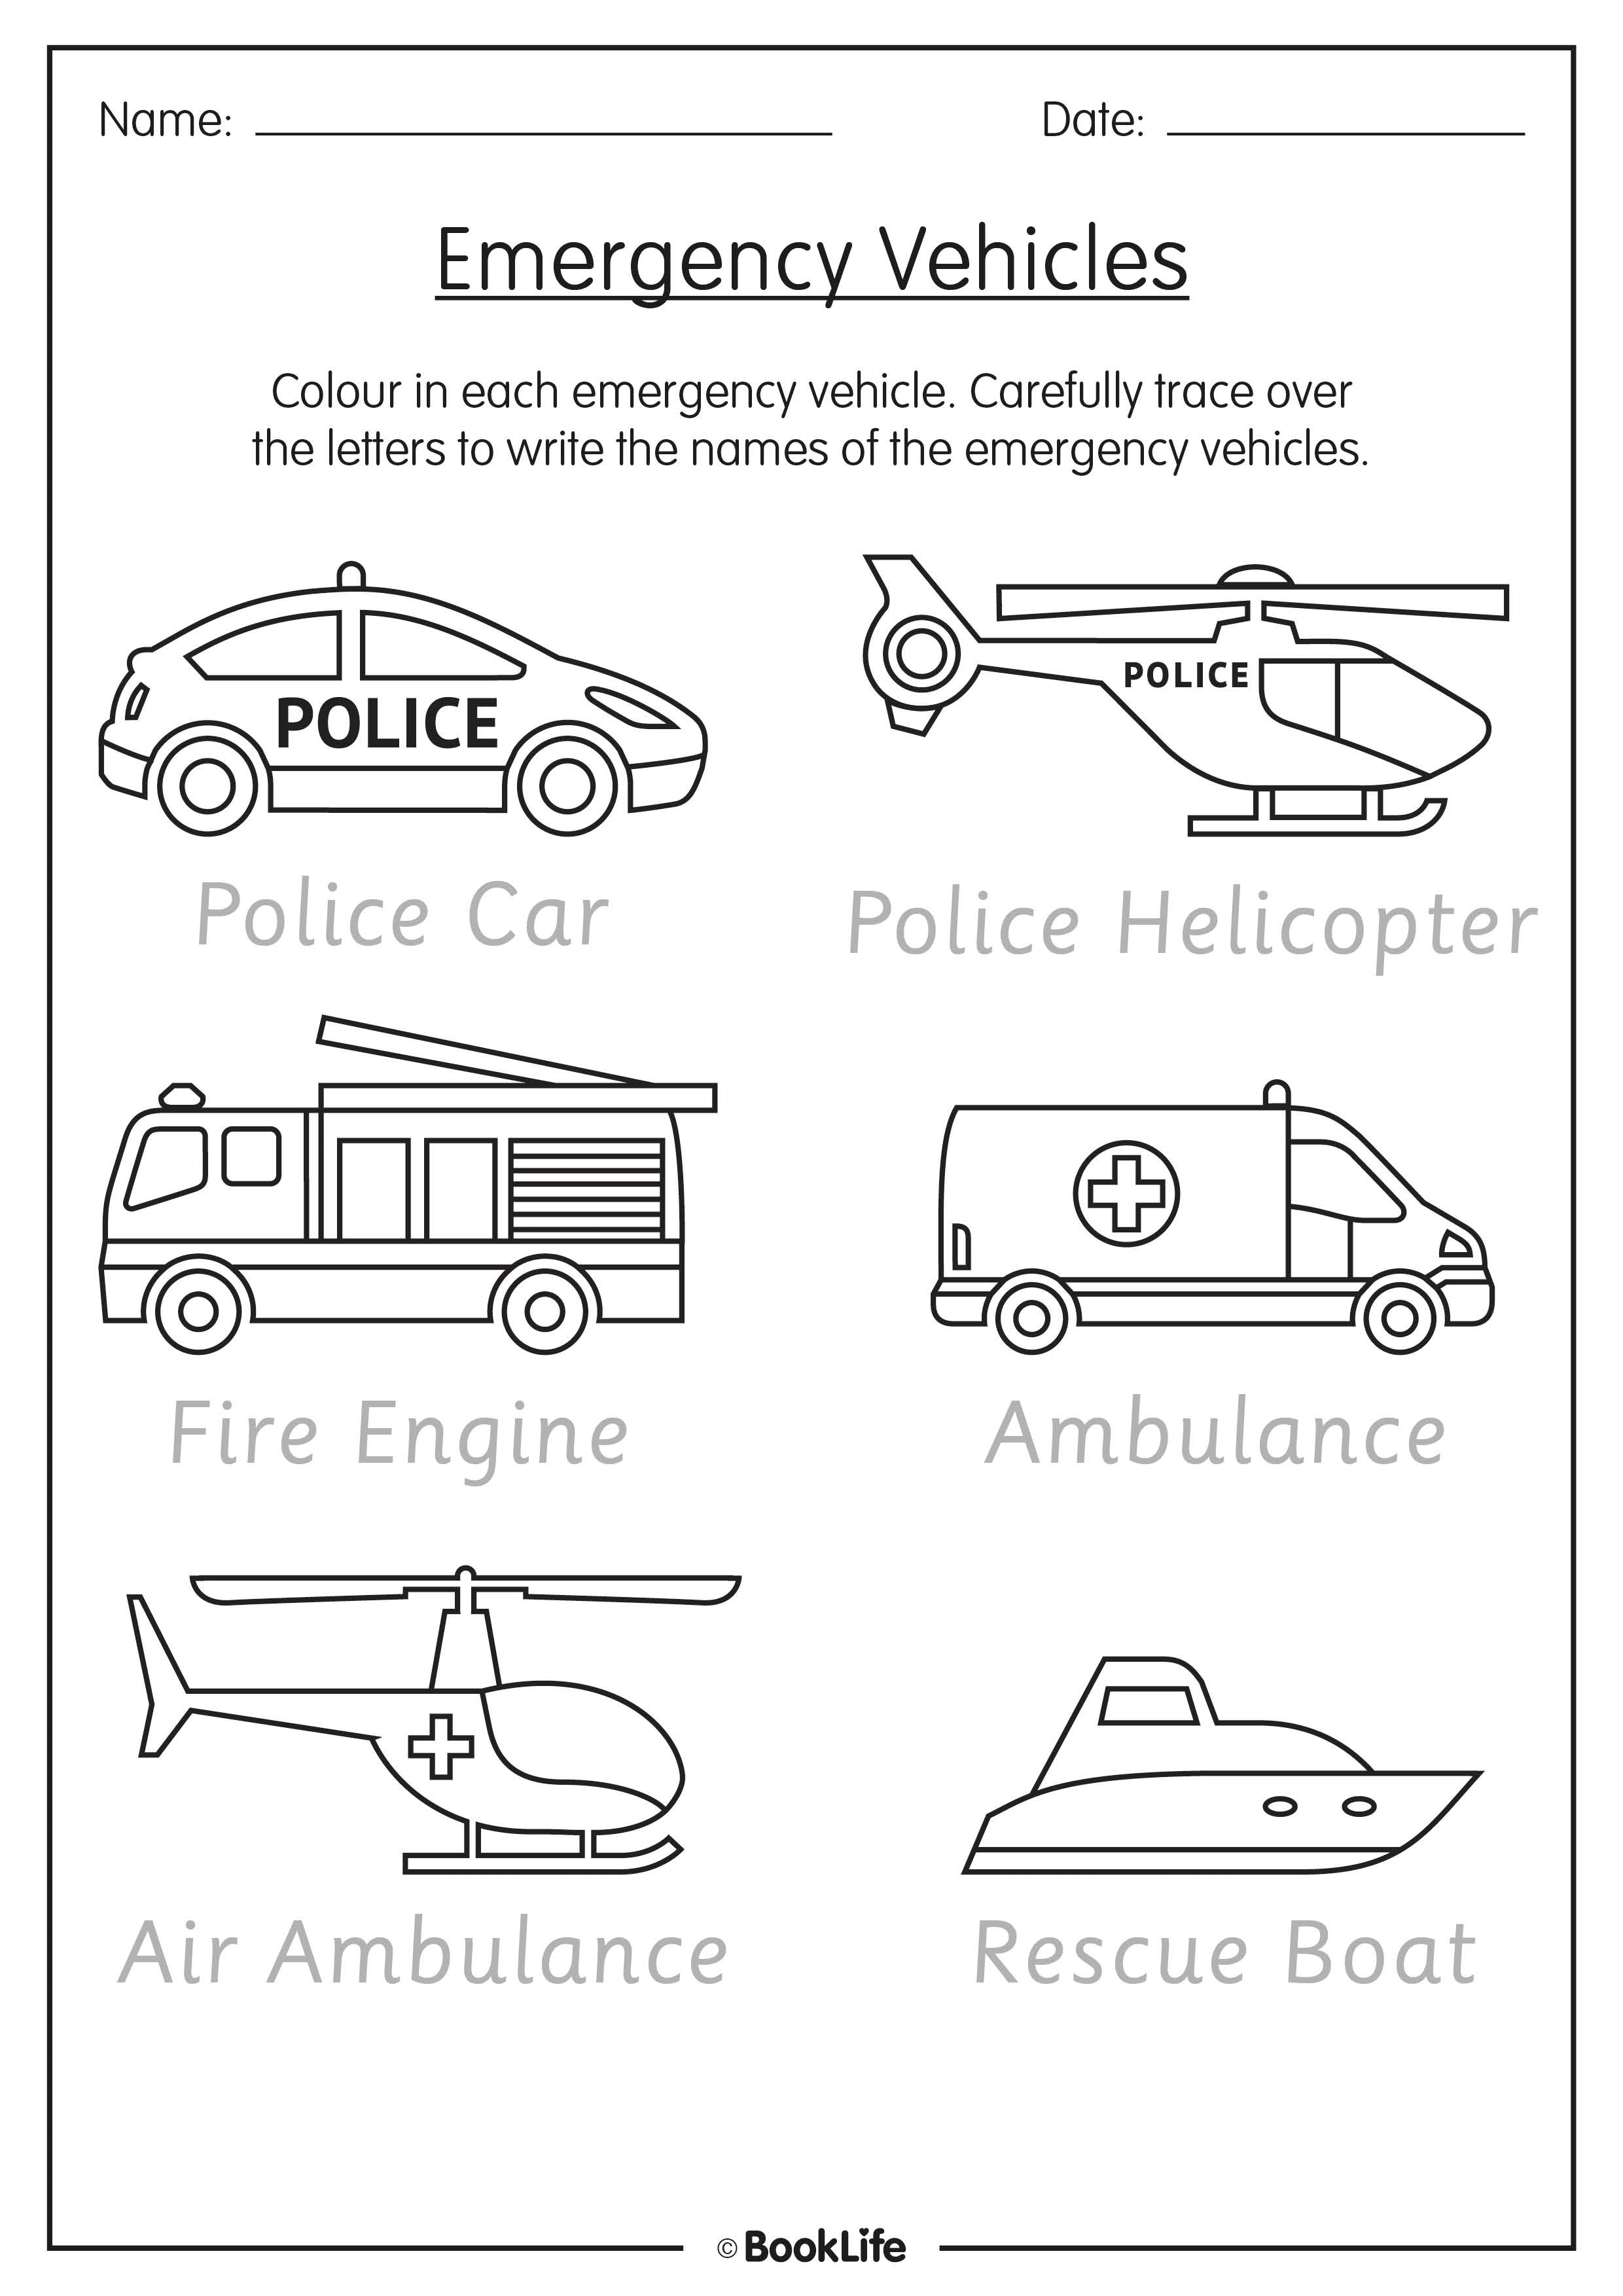 Emergency Vehicles by BookLife